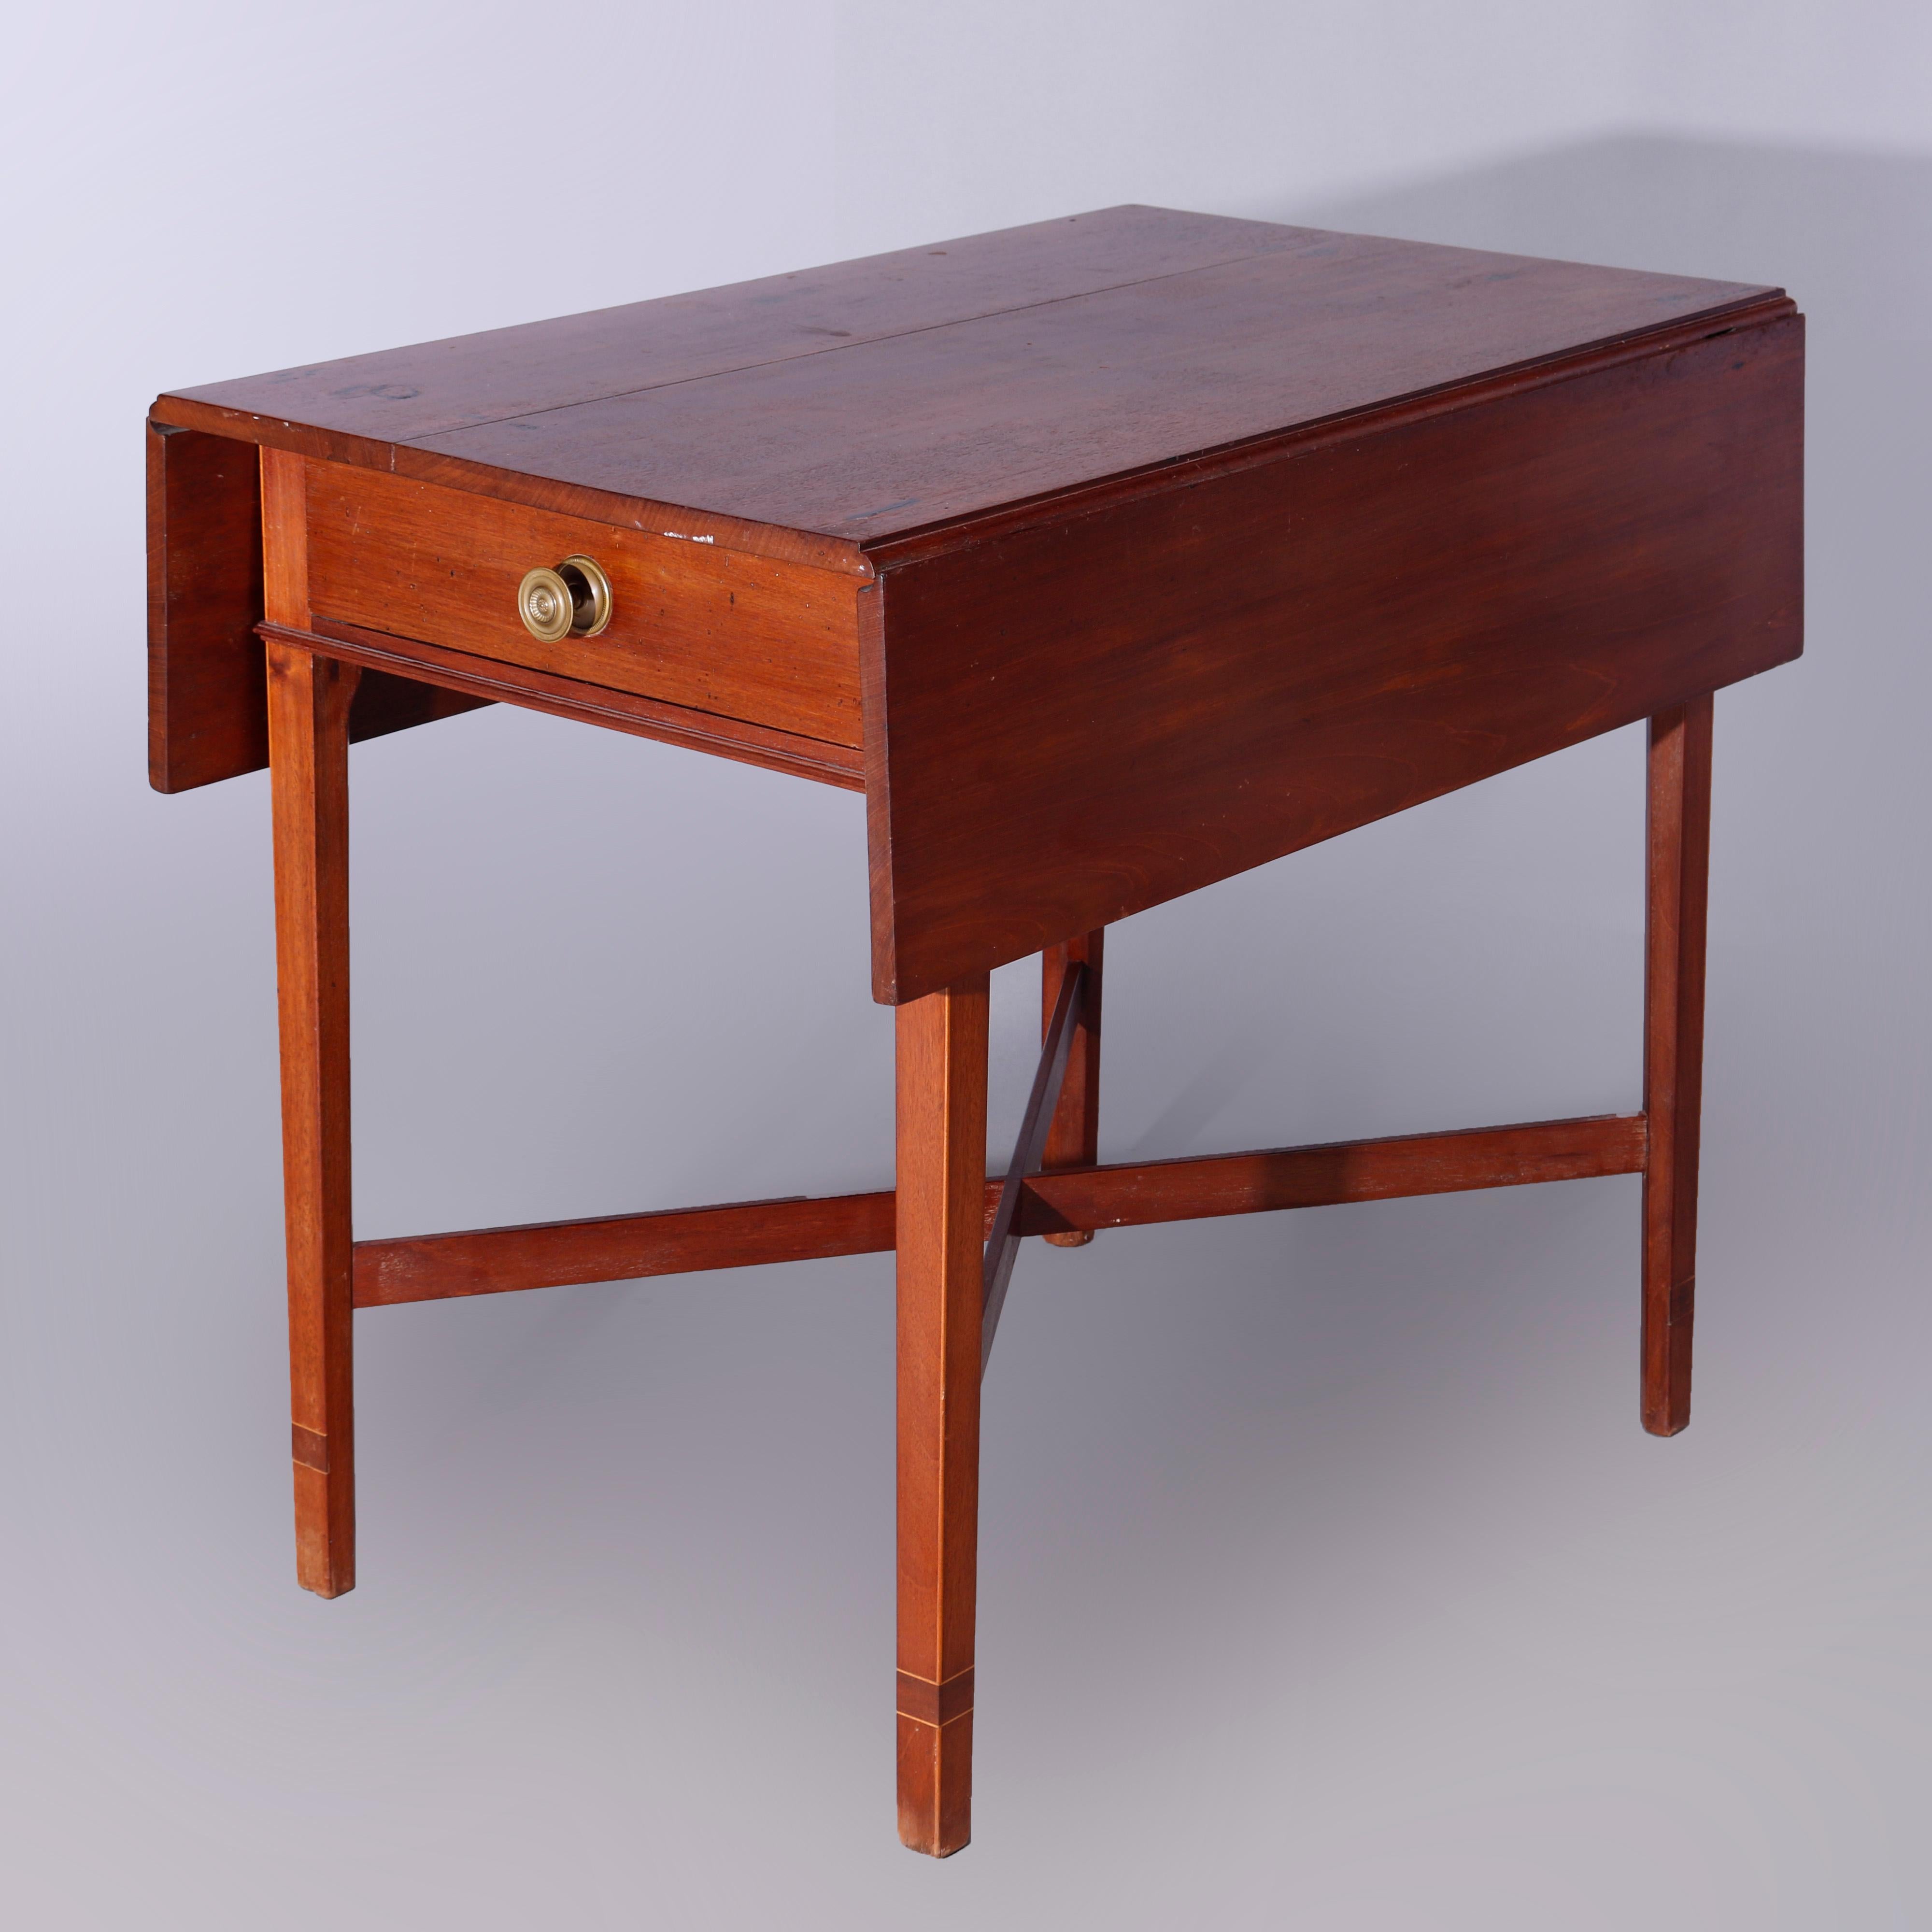 Antique English Mahogany Pembroke Drop Leaf Table Circa 1820 In Good Condition For Sale In Big Flats, NY